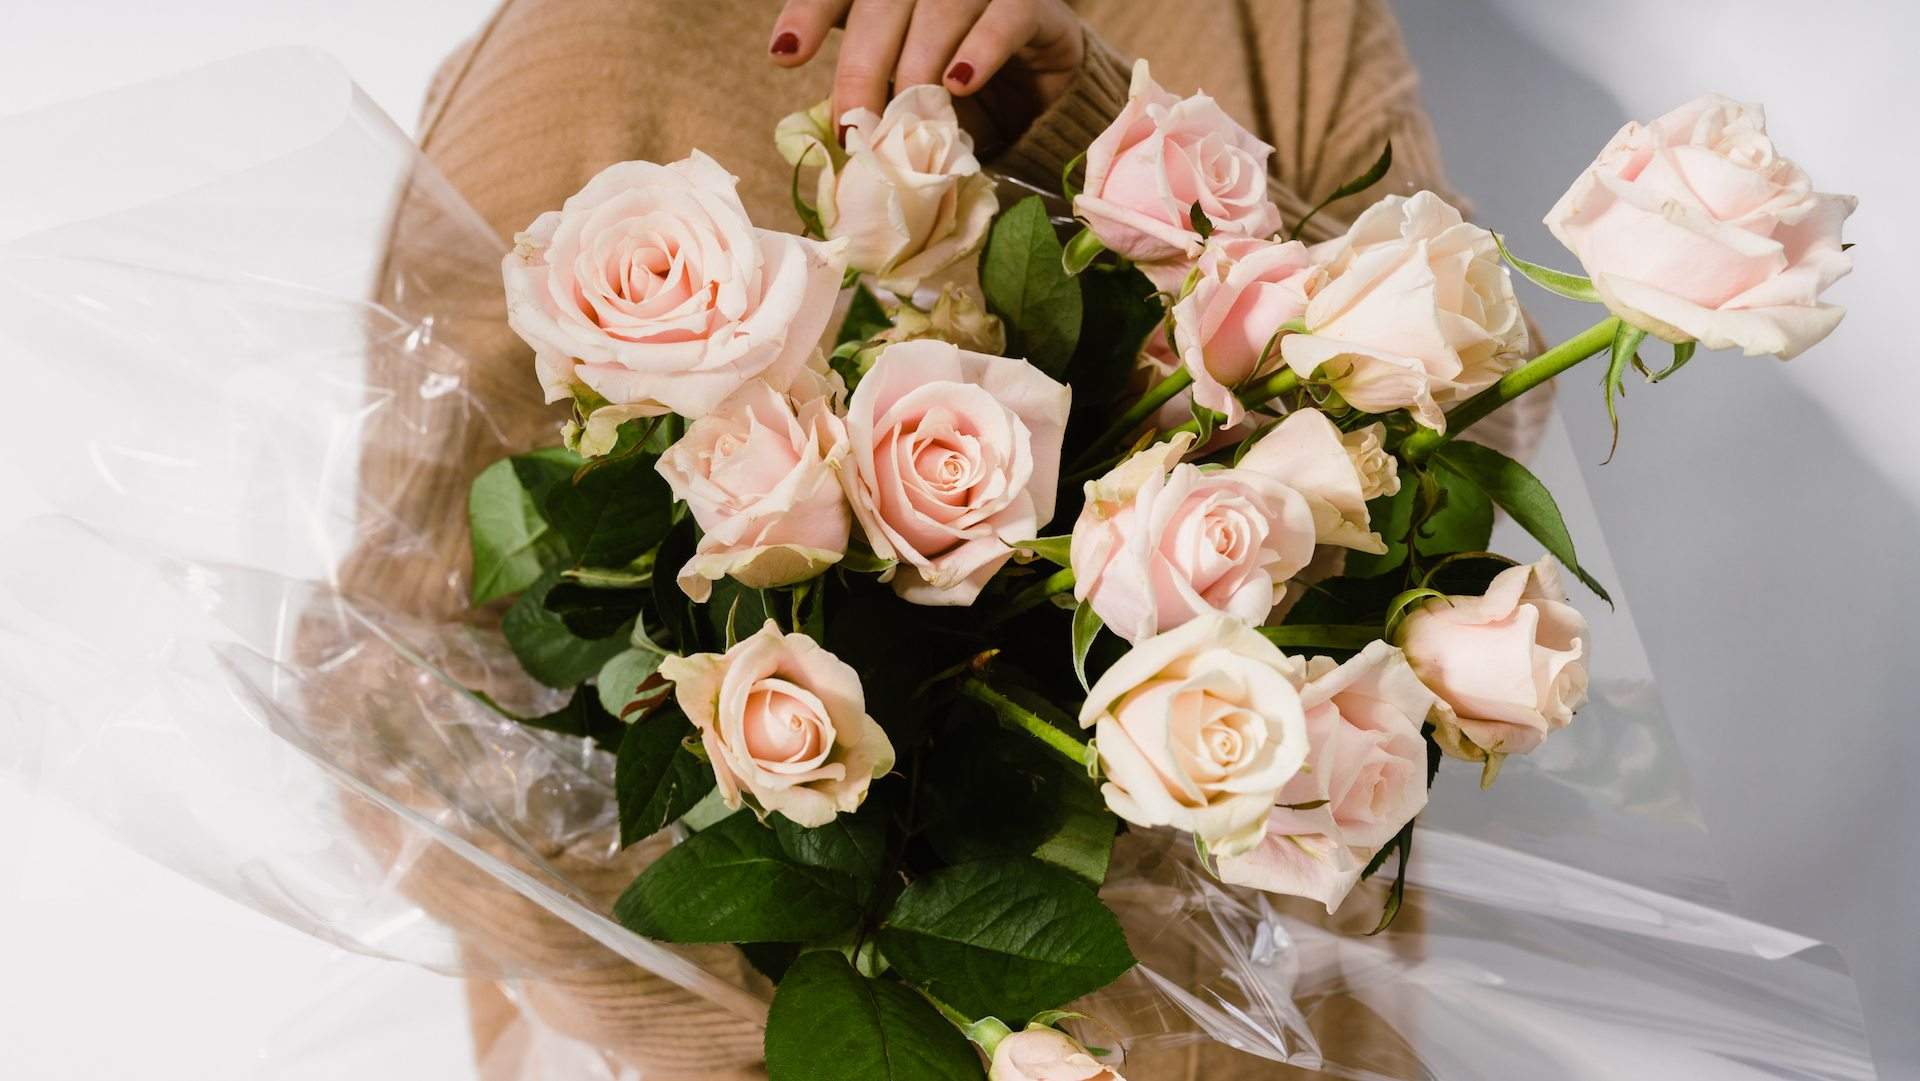 Positive Parcels Is the New Melbourne Flower Service Delivering Cheery Bouquets to Your Door